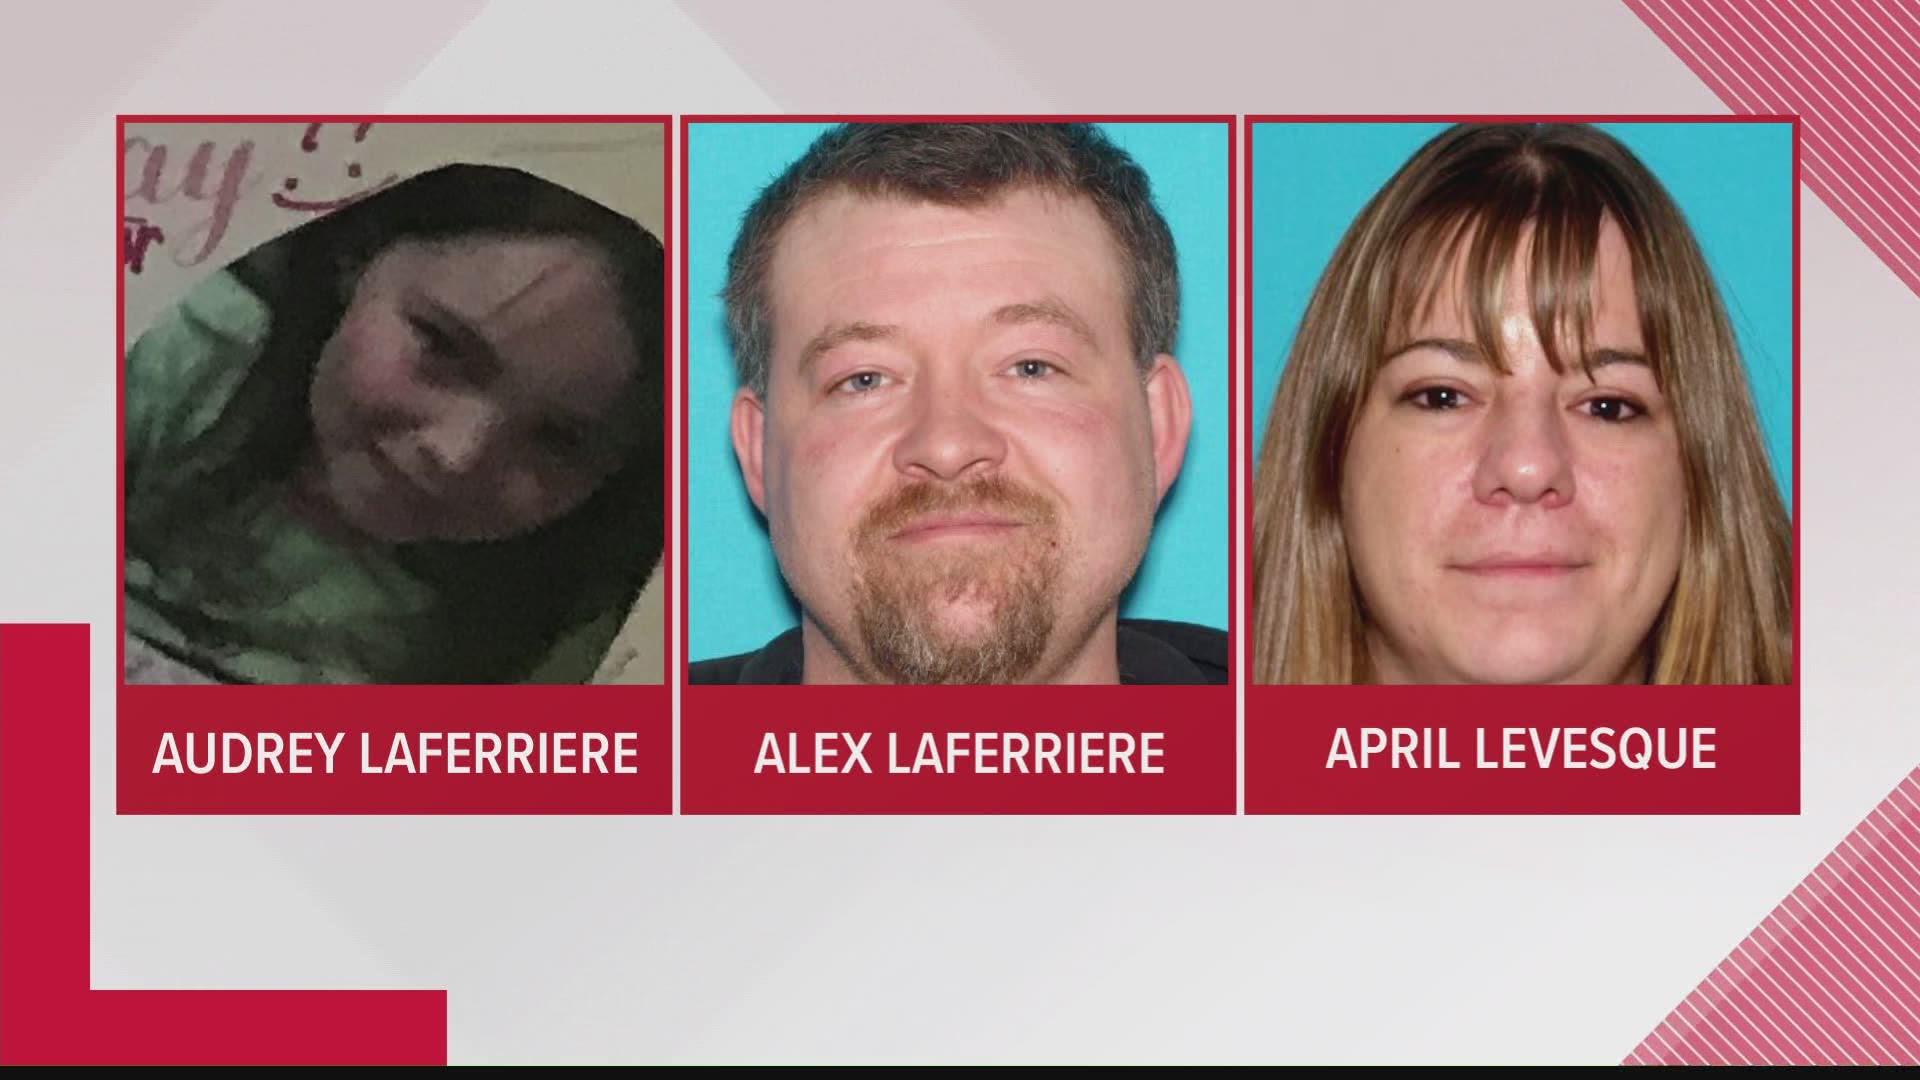 Audrey Laferriere has been found safe, according to Maine State Police.